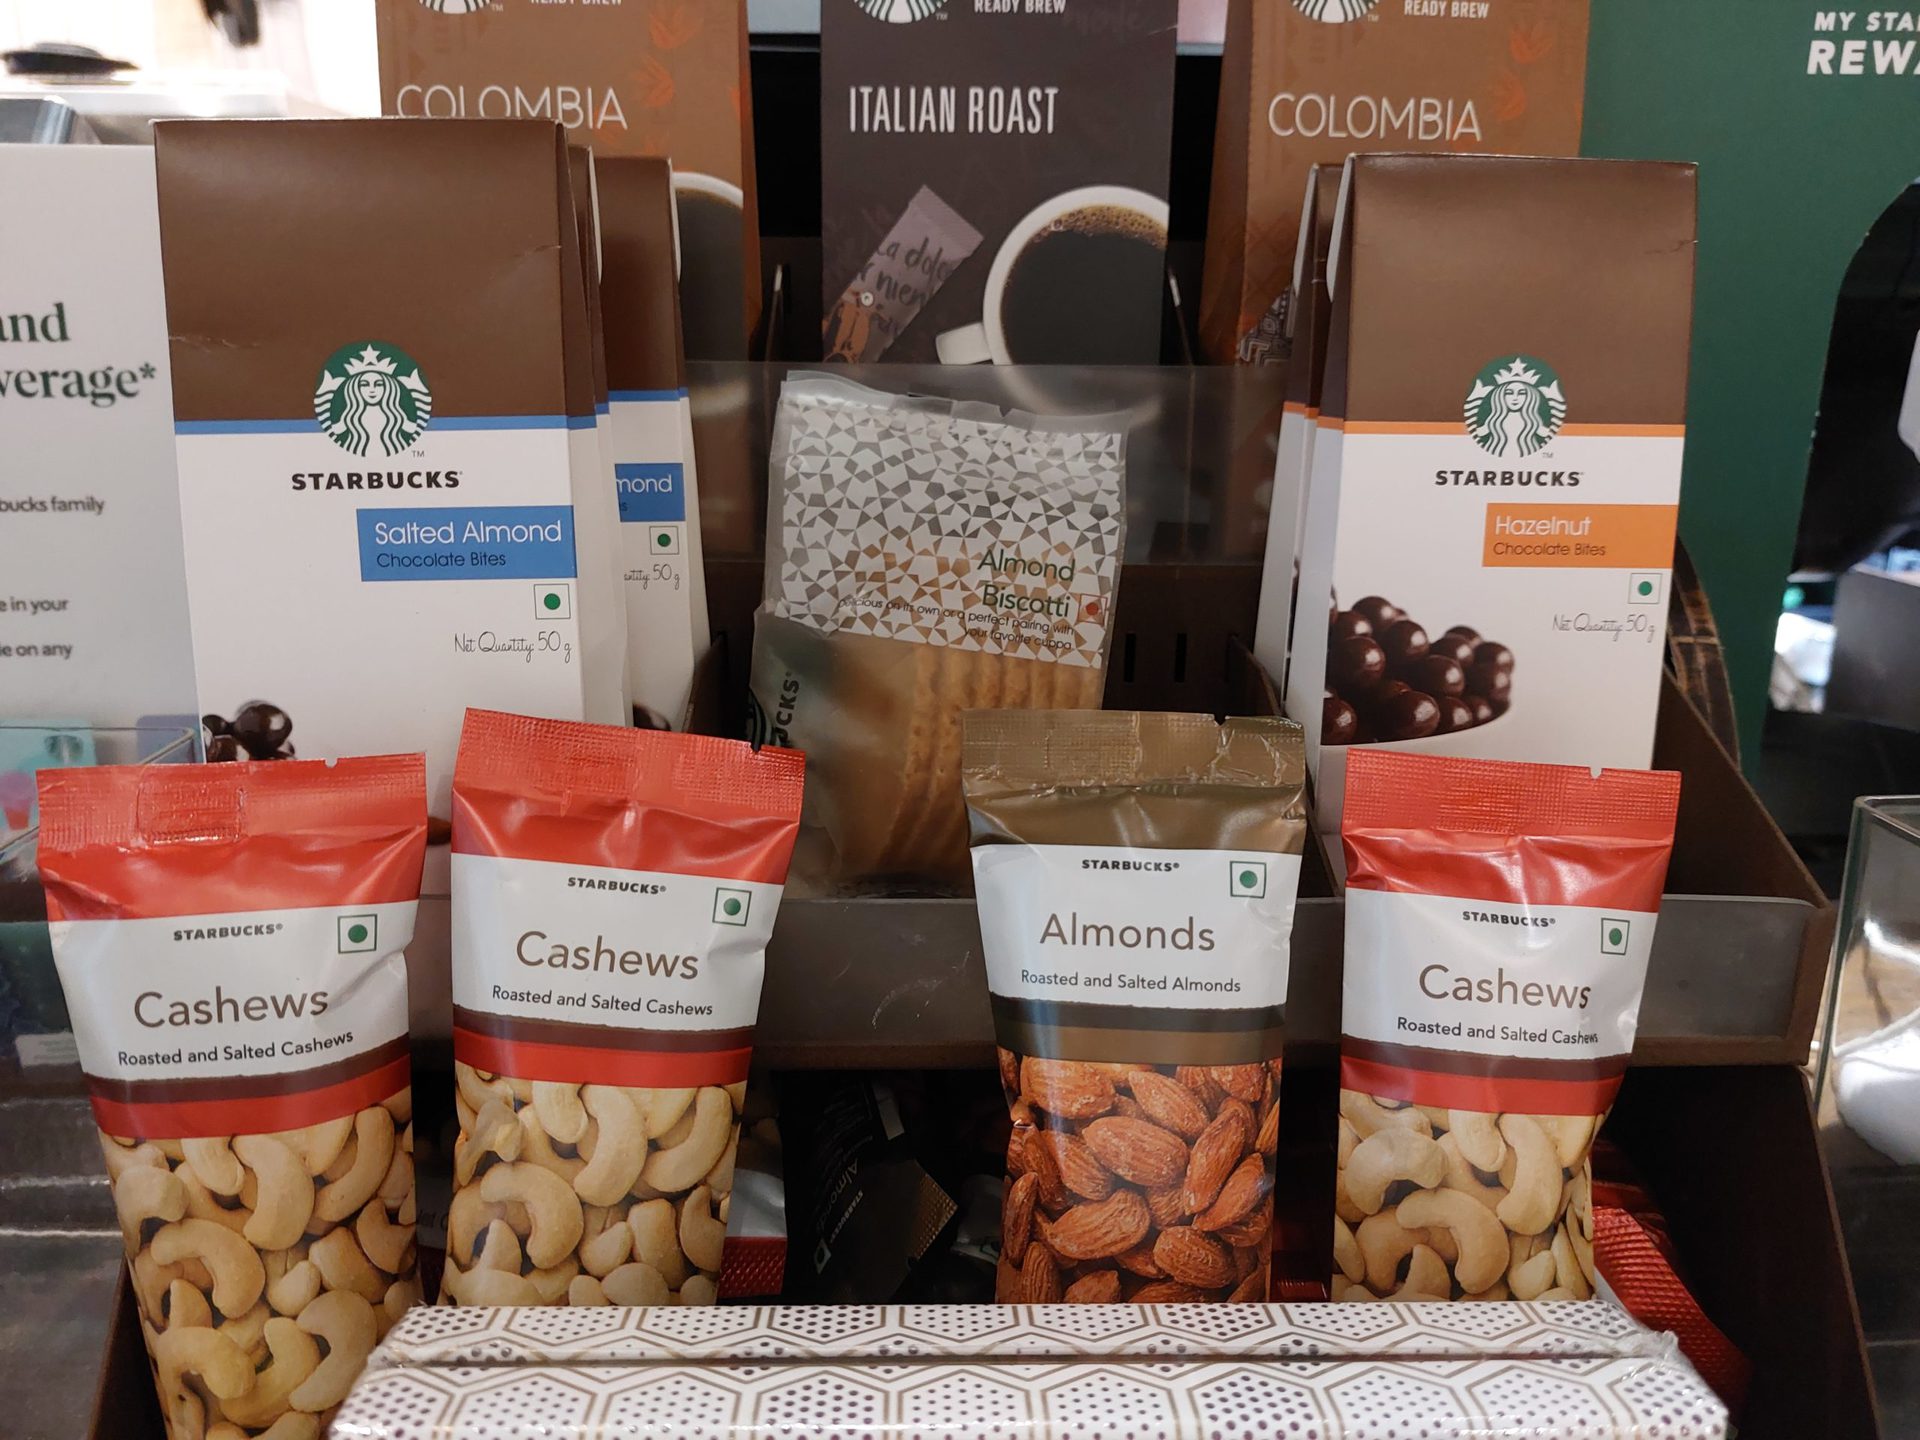 Samsung Galaxy A52s 5G indoor shot at Starbucks showing some nuts and coffee.